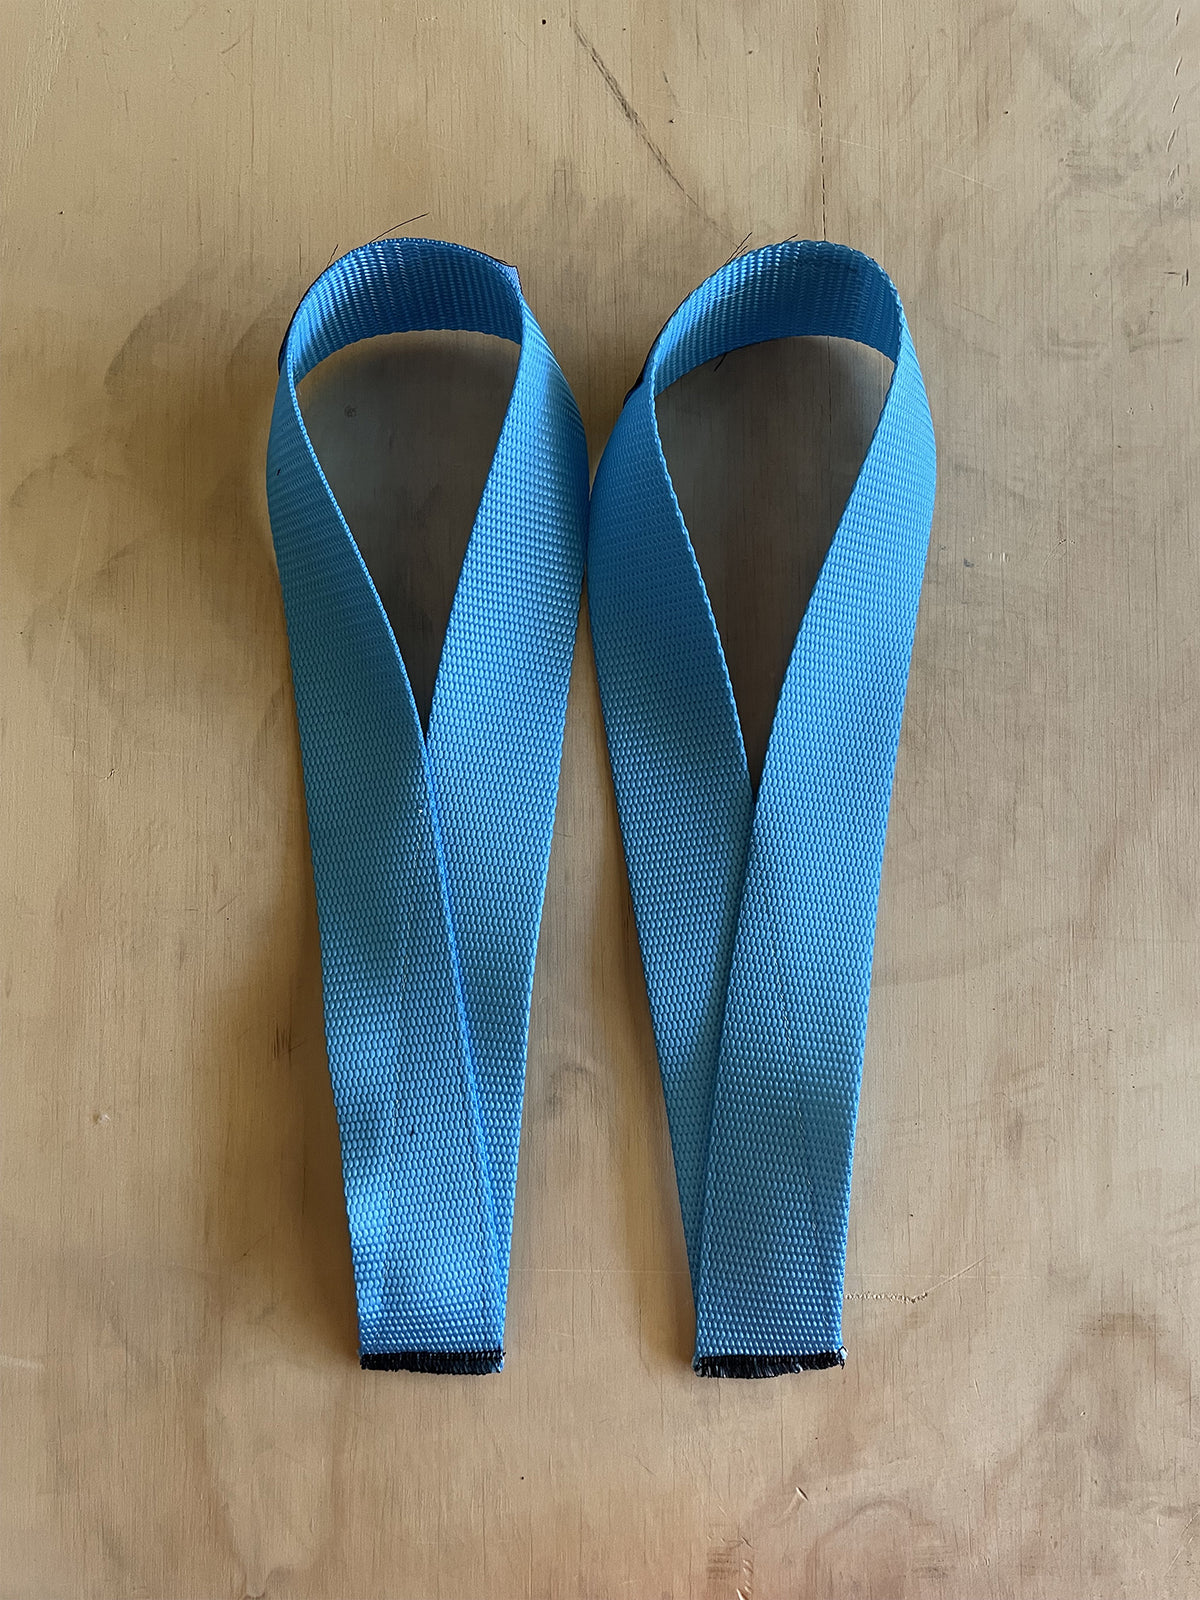 Blue Olympic Lifting Straps for Weightlifting